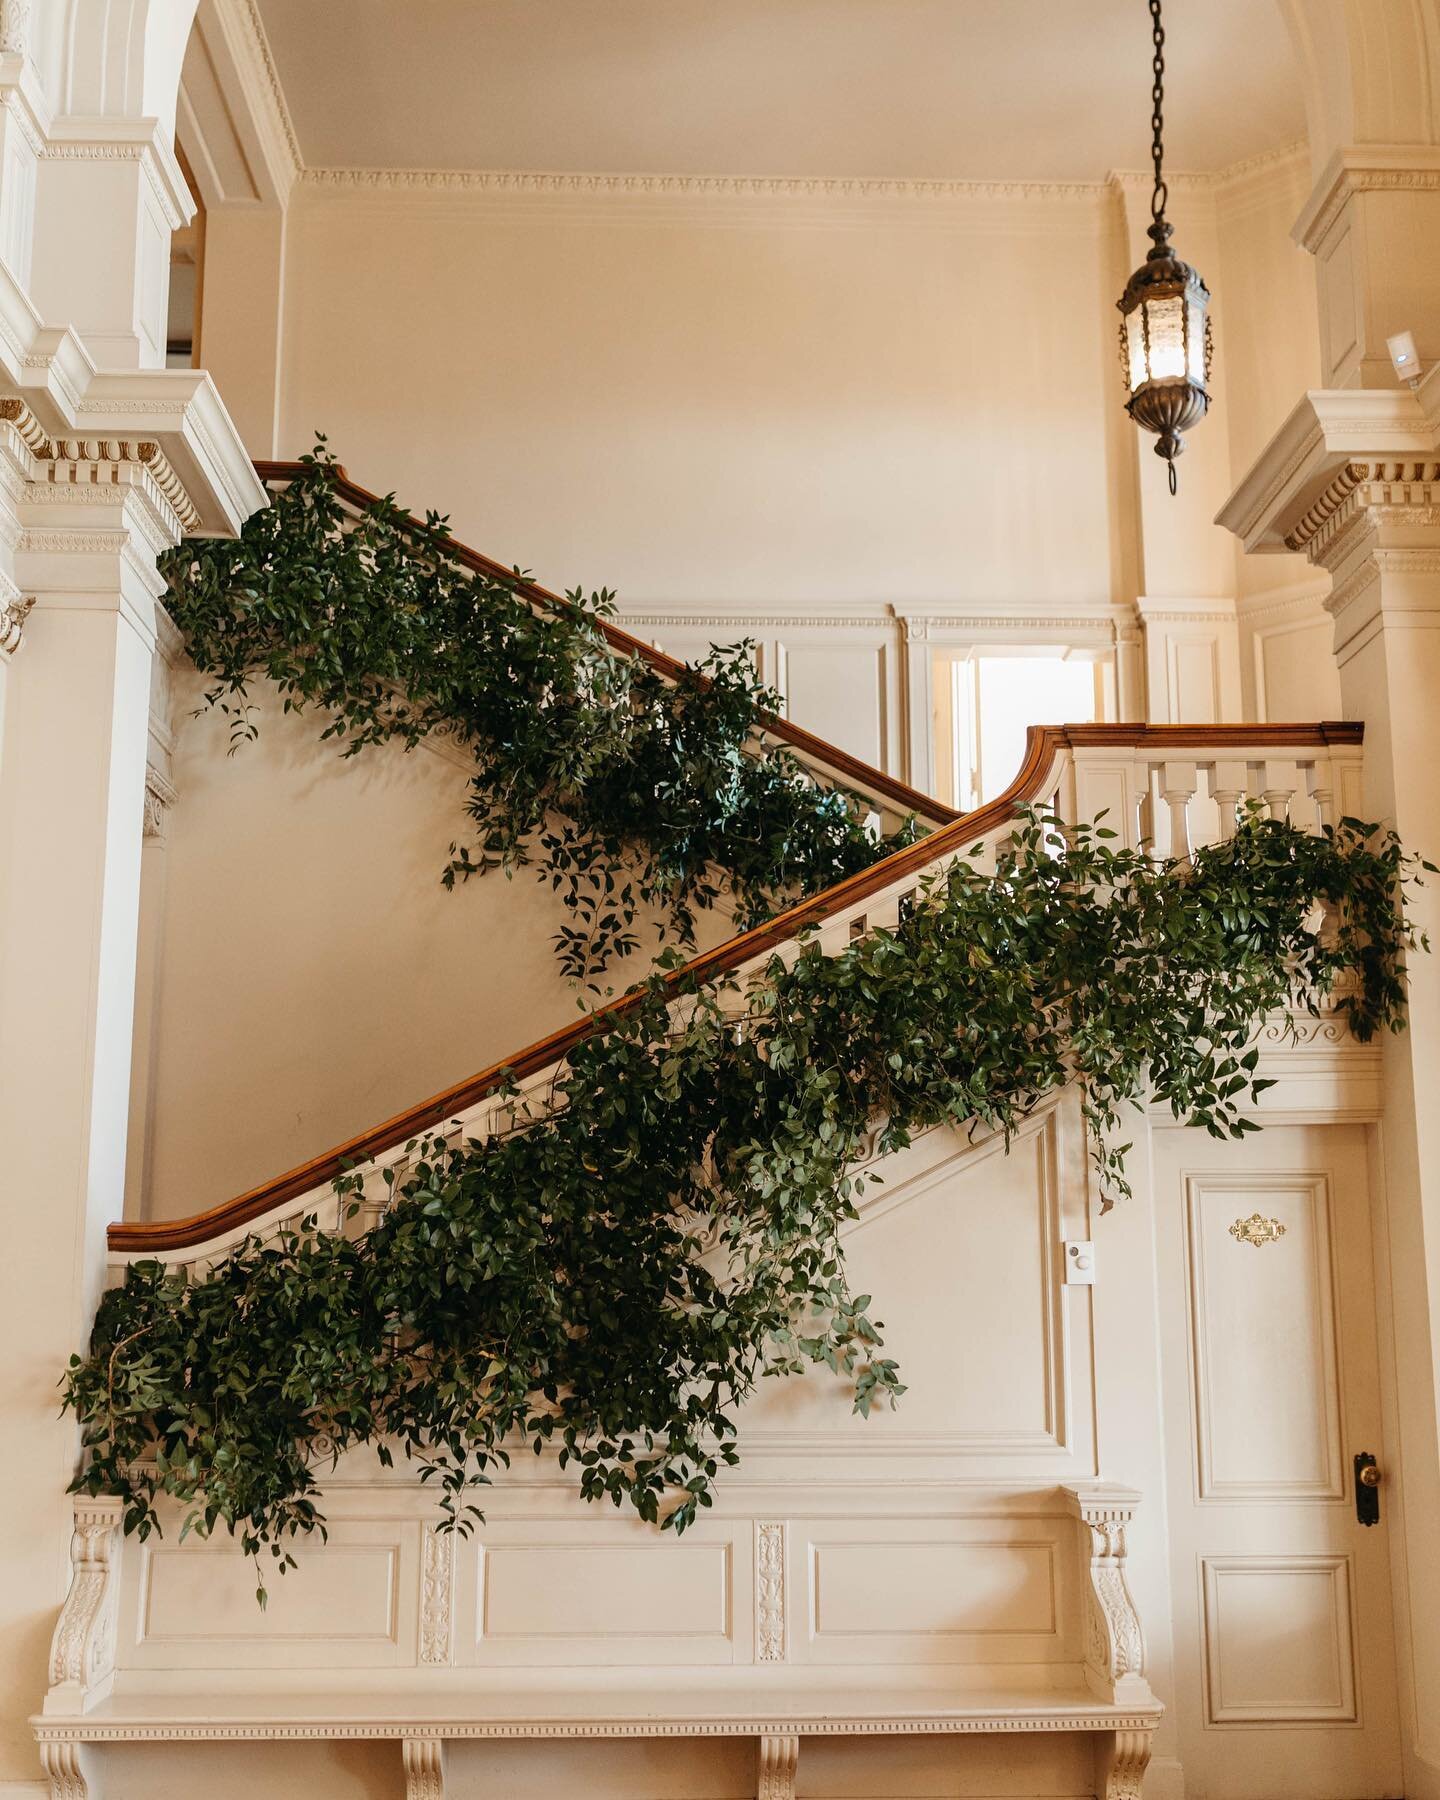 Laura and Greg&rsquo;s sophisticated wedding, with this stunning staircase at Cairnwood Estate! 
&bull;
&bull;
Photography: @madeline.isabella